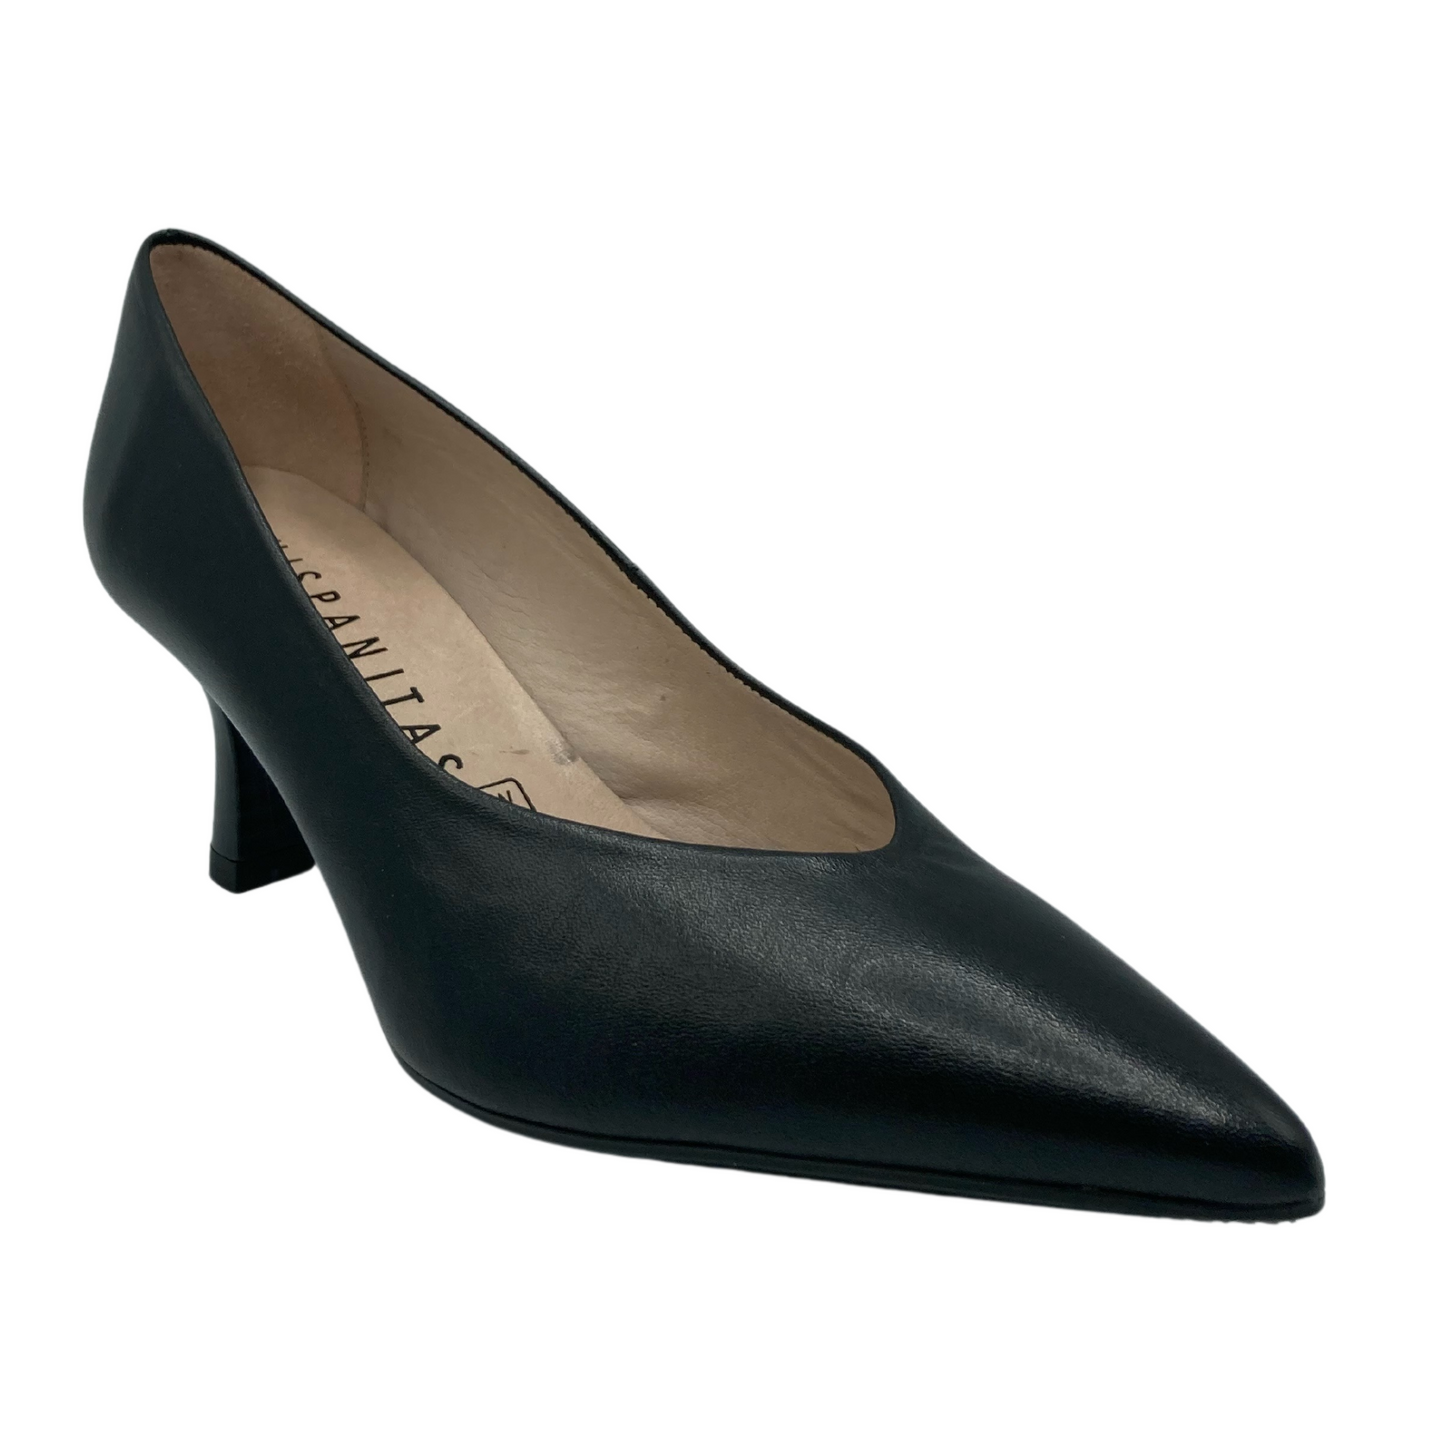 45 degree angled view of black leather pump with pointed toe and flared heel